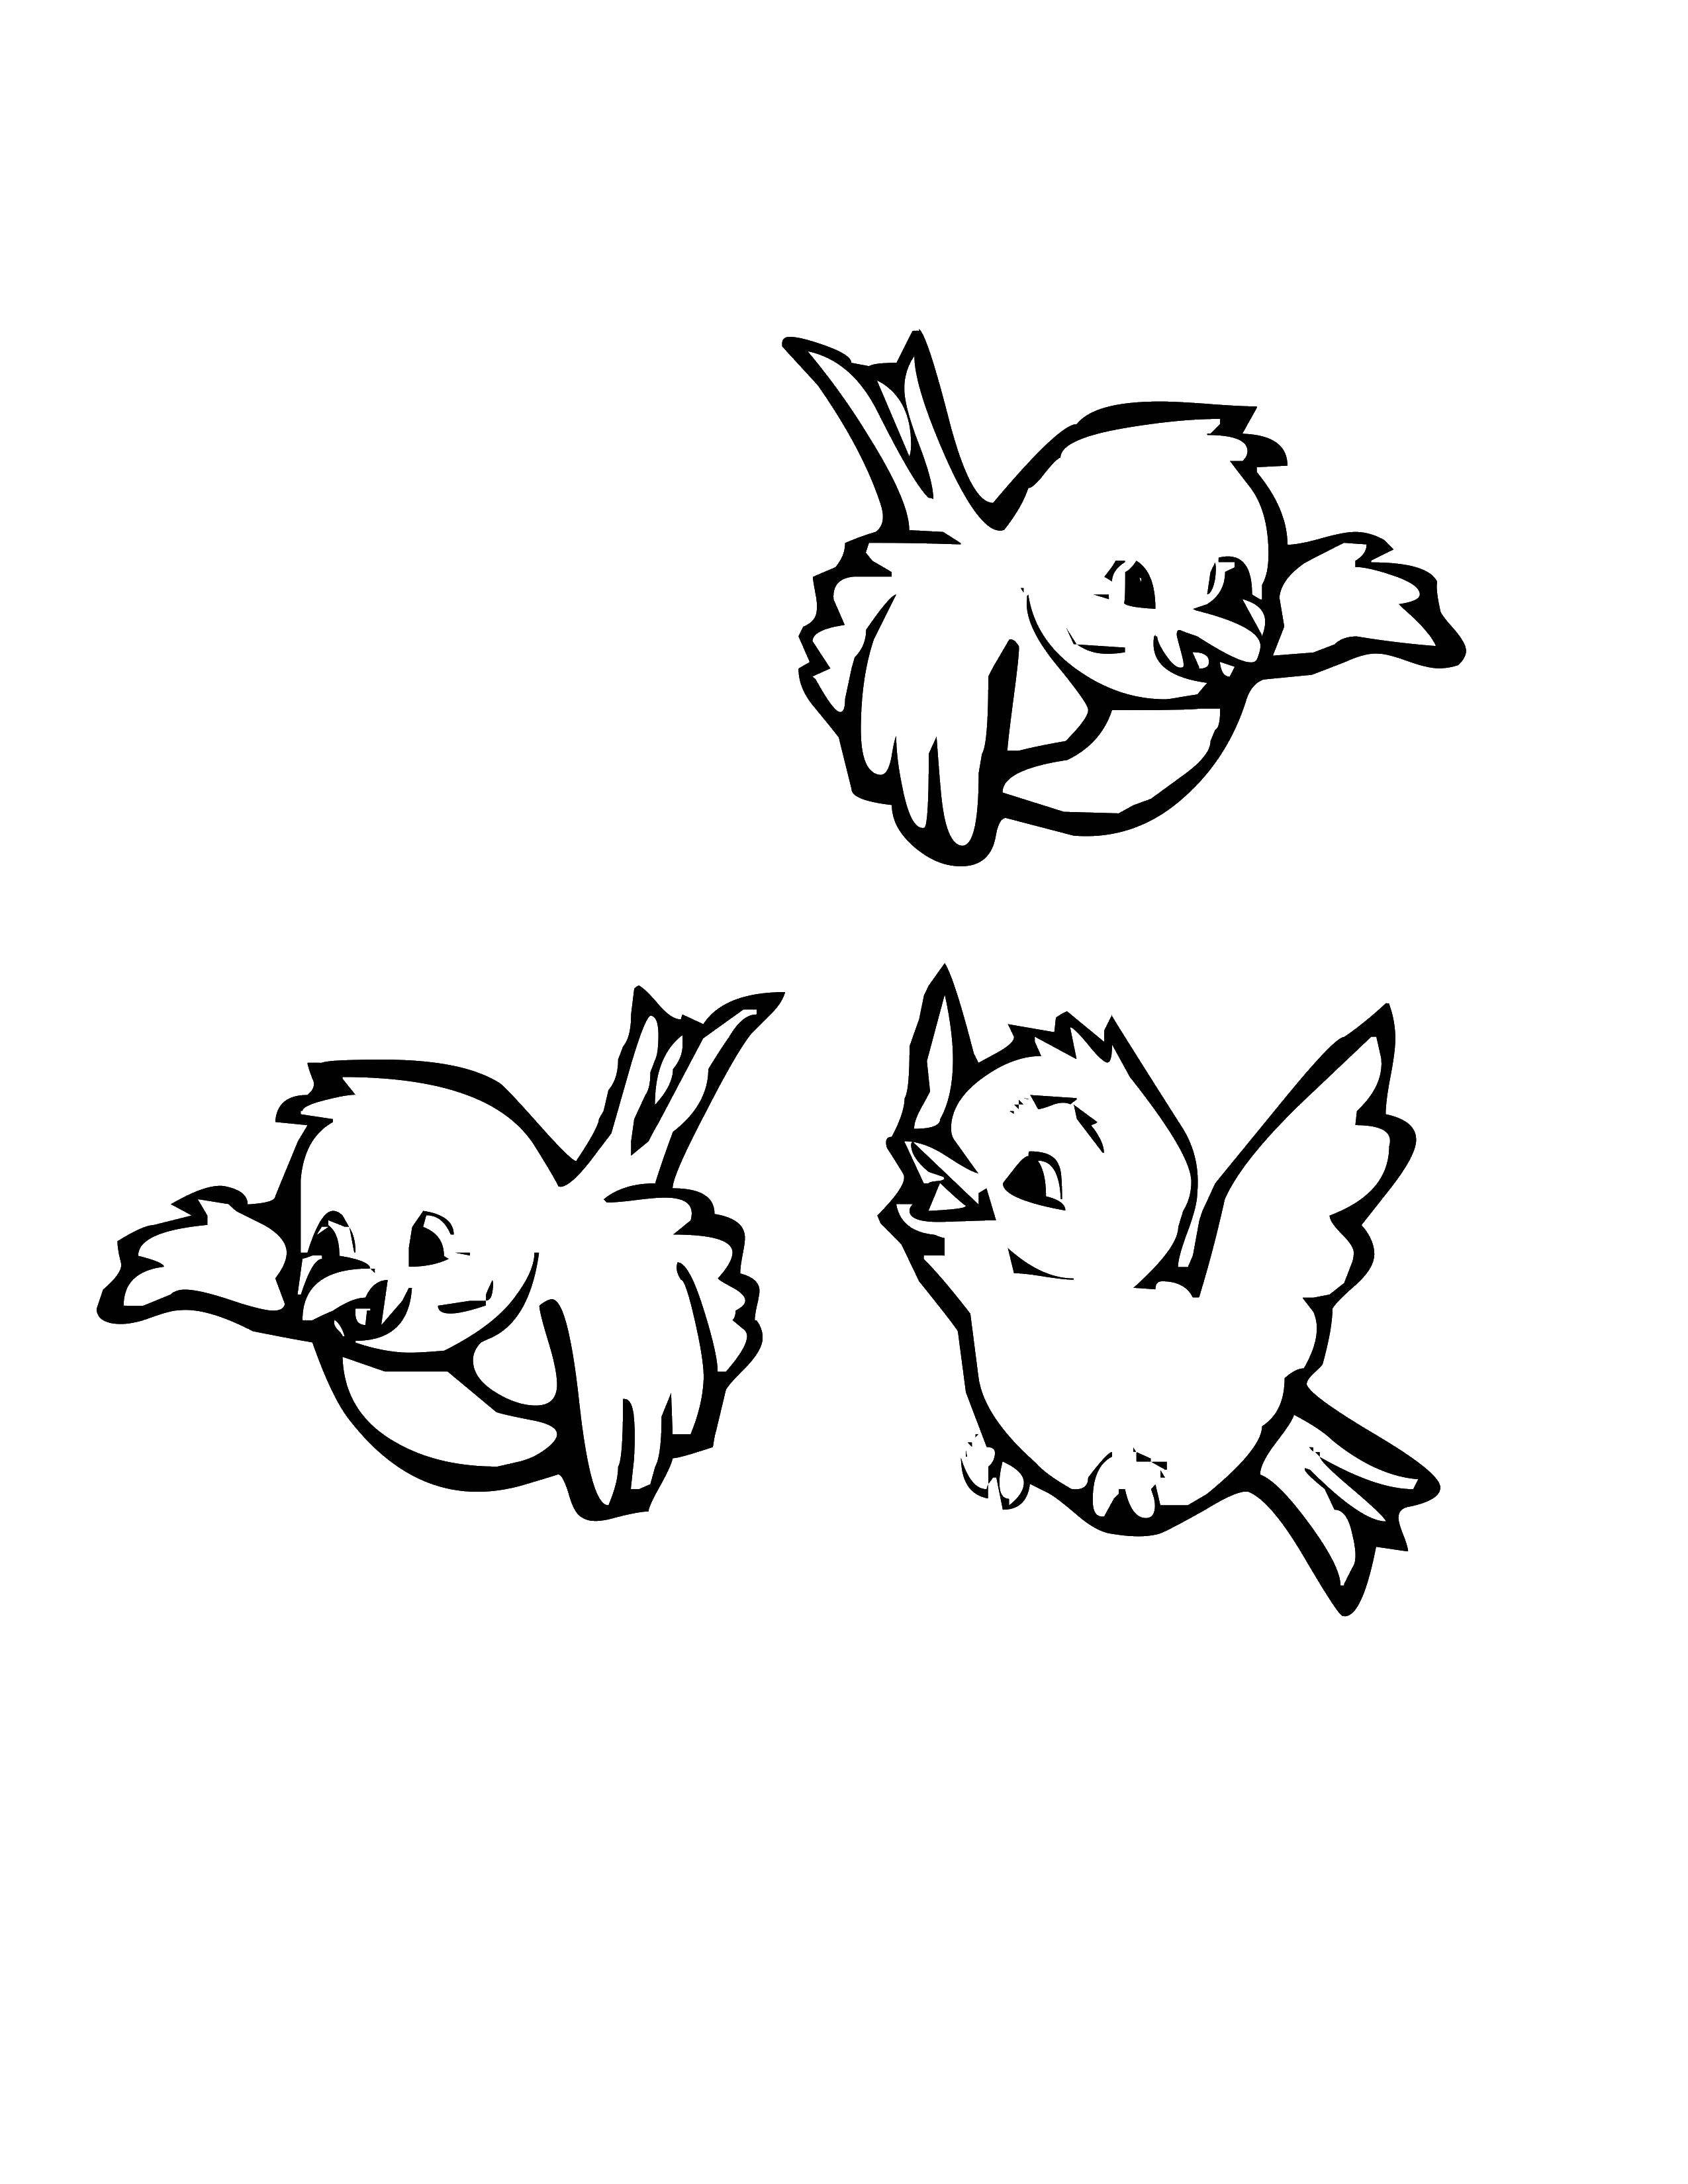 Coloring Chicks. Category Birds. Tags:  Chicks.